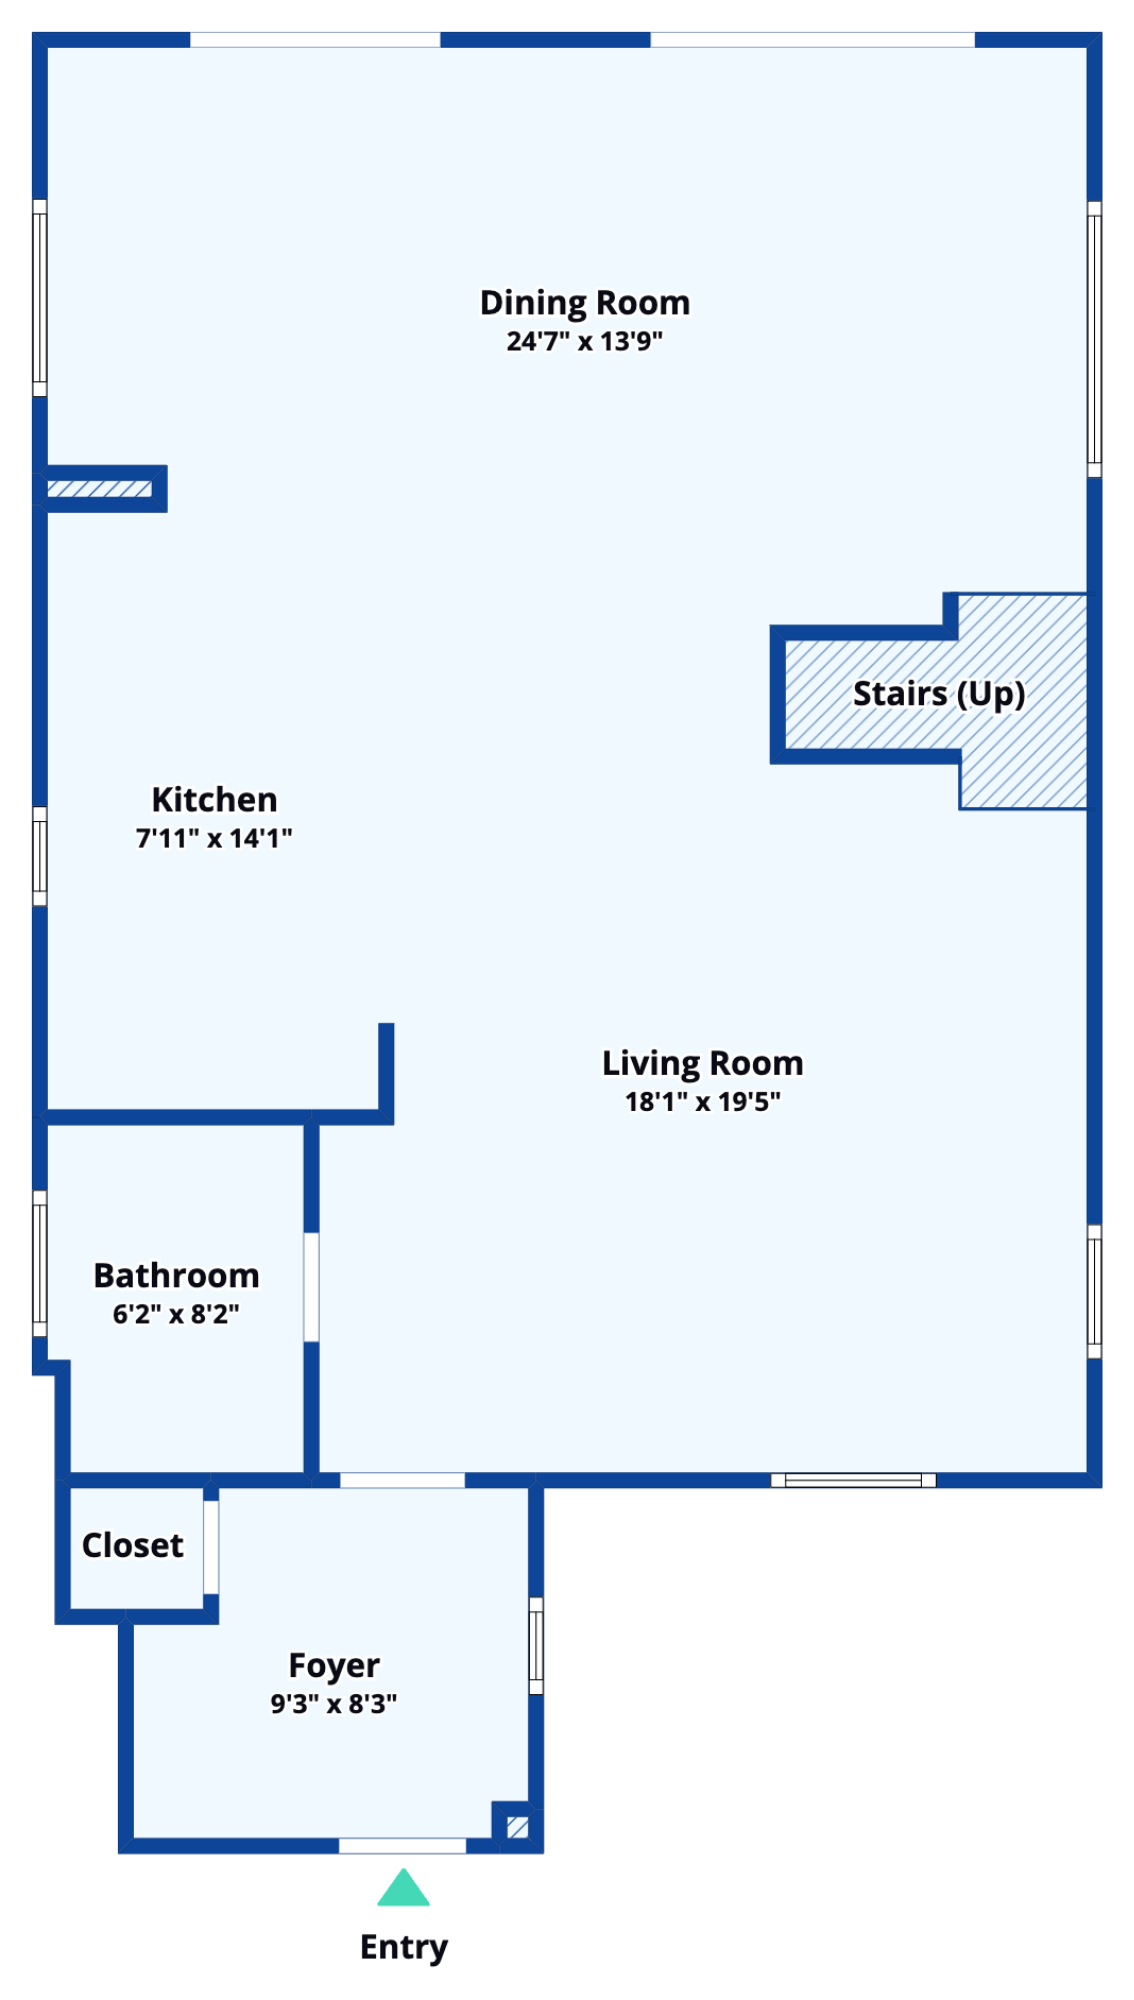 Floor plan preview, click to explore more